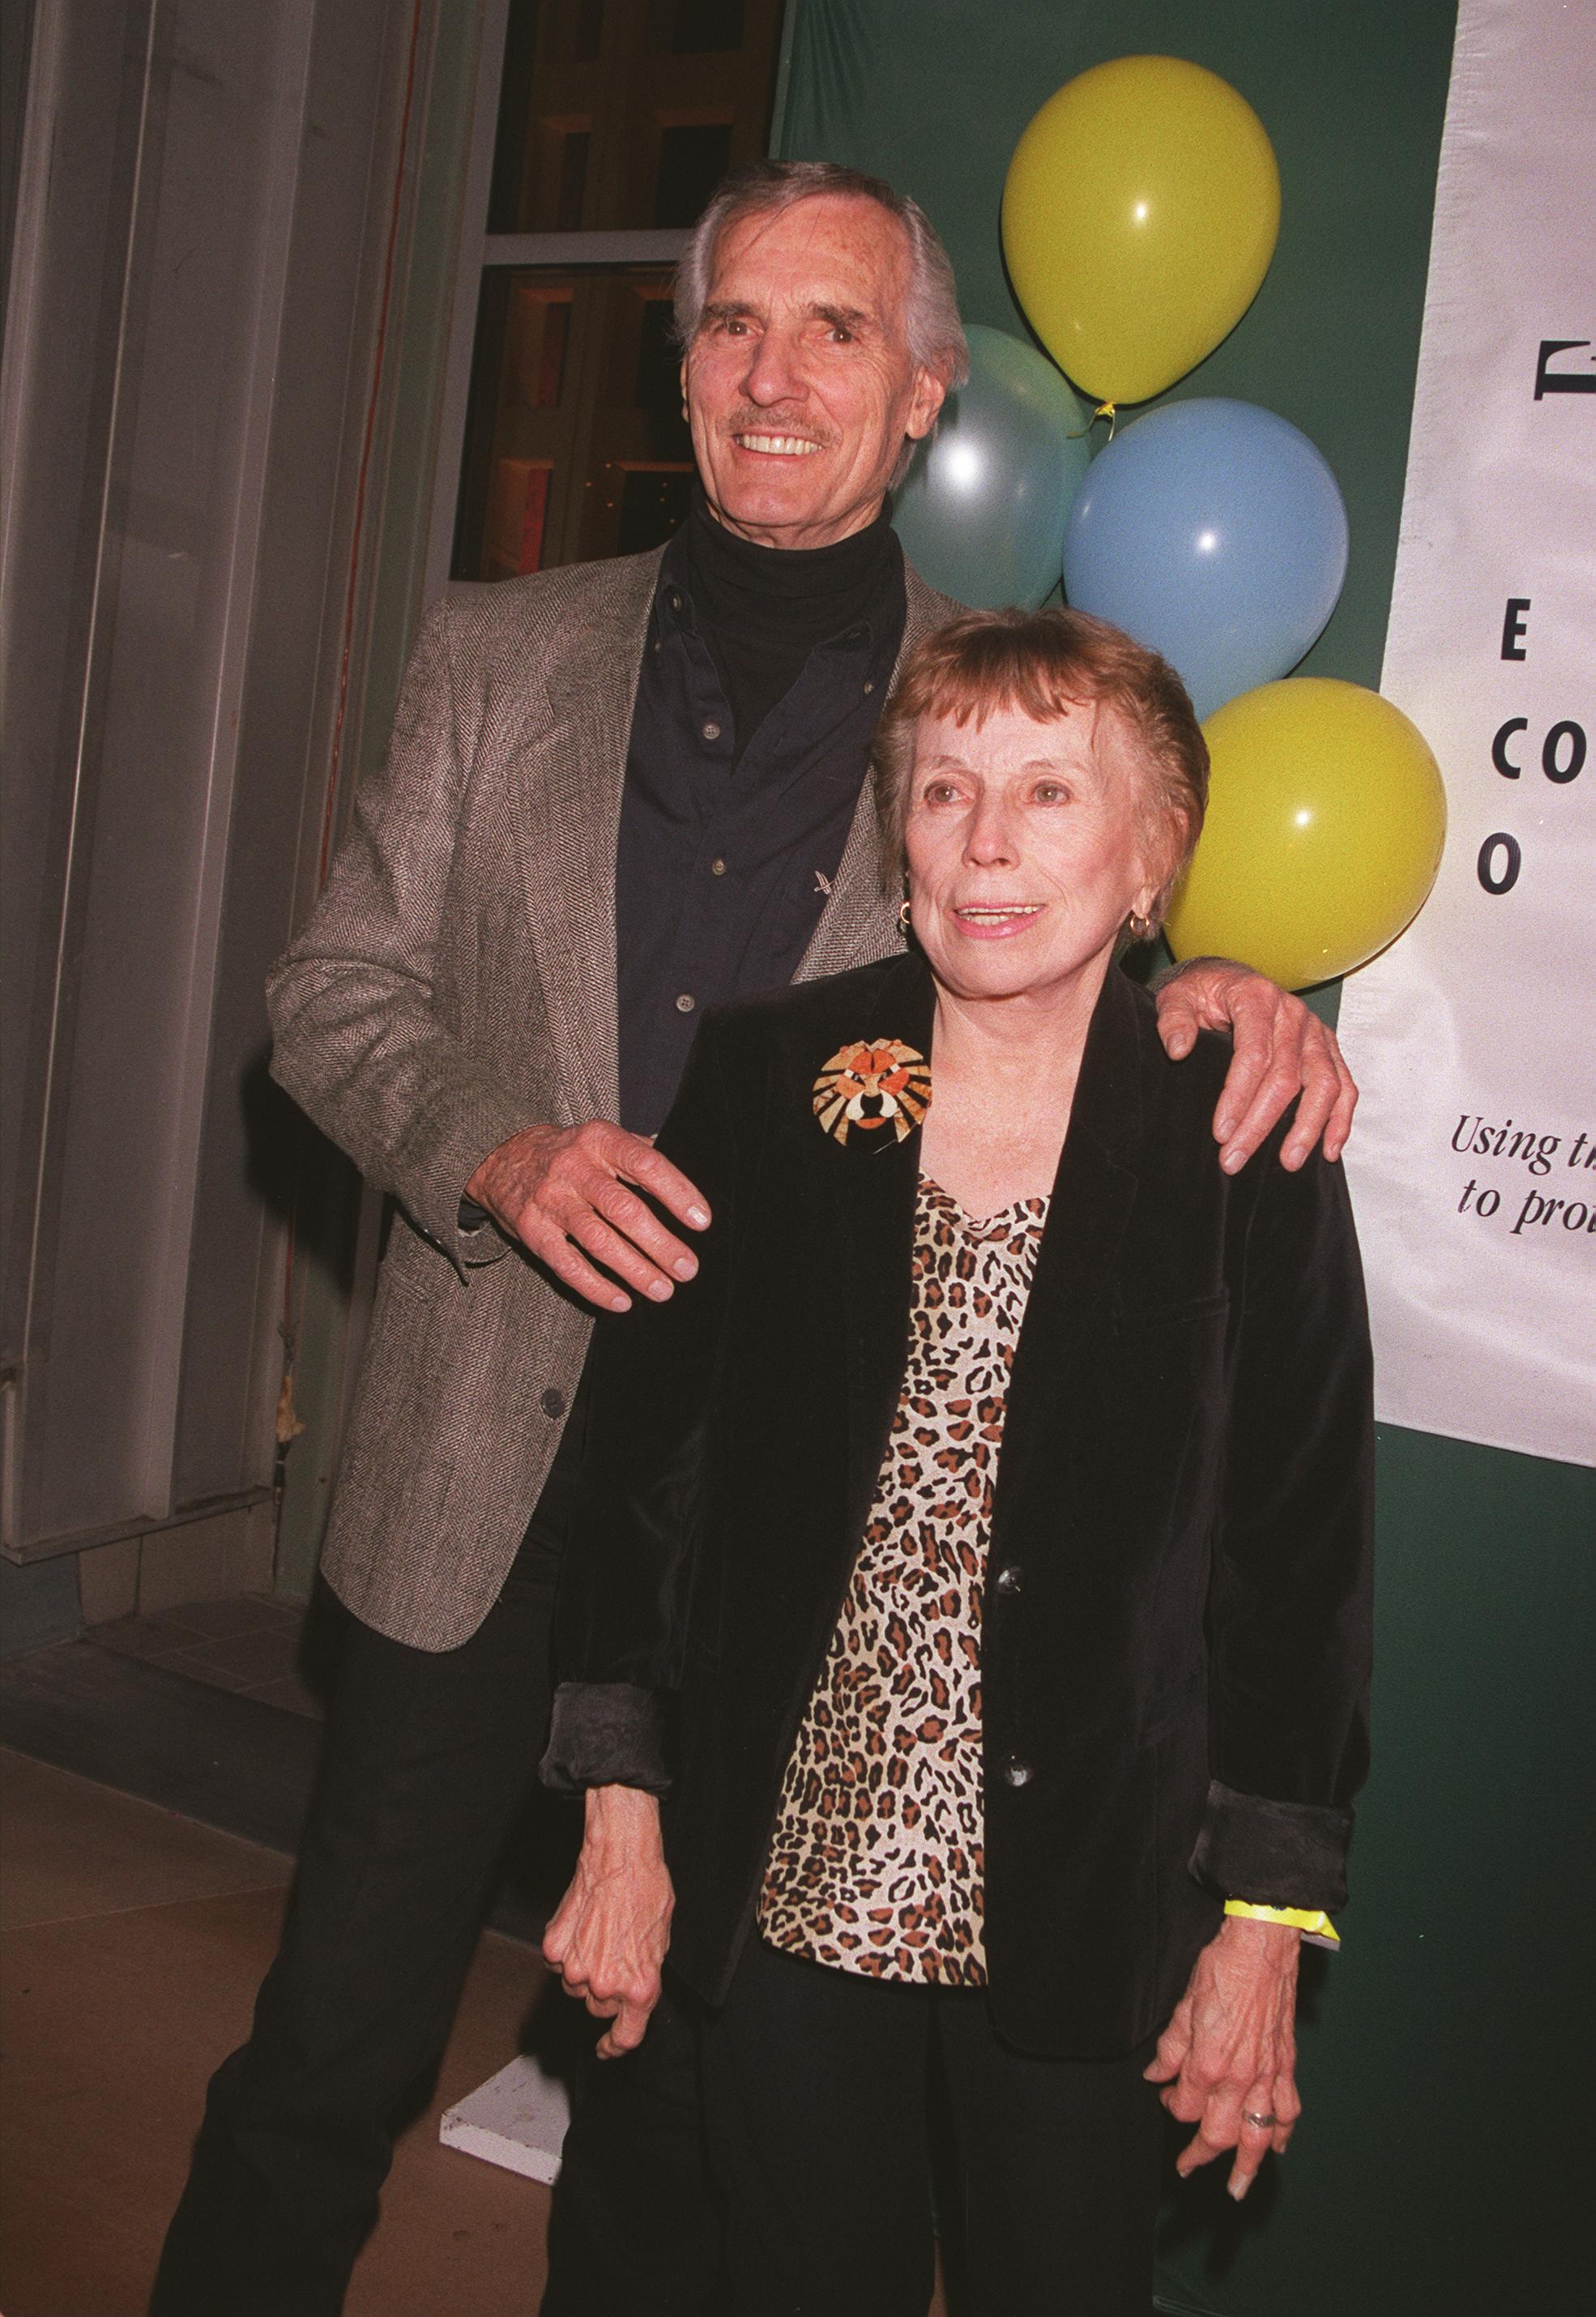 Dennis Weaver and his wife pose at the premiere of "Why Are We Here?" the Public Awareness Campaign on November 15, 2000 in Los Angeles, California. / Source: Getty Images